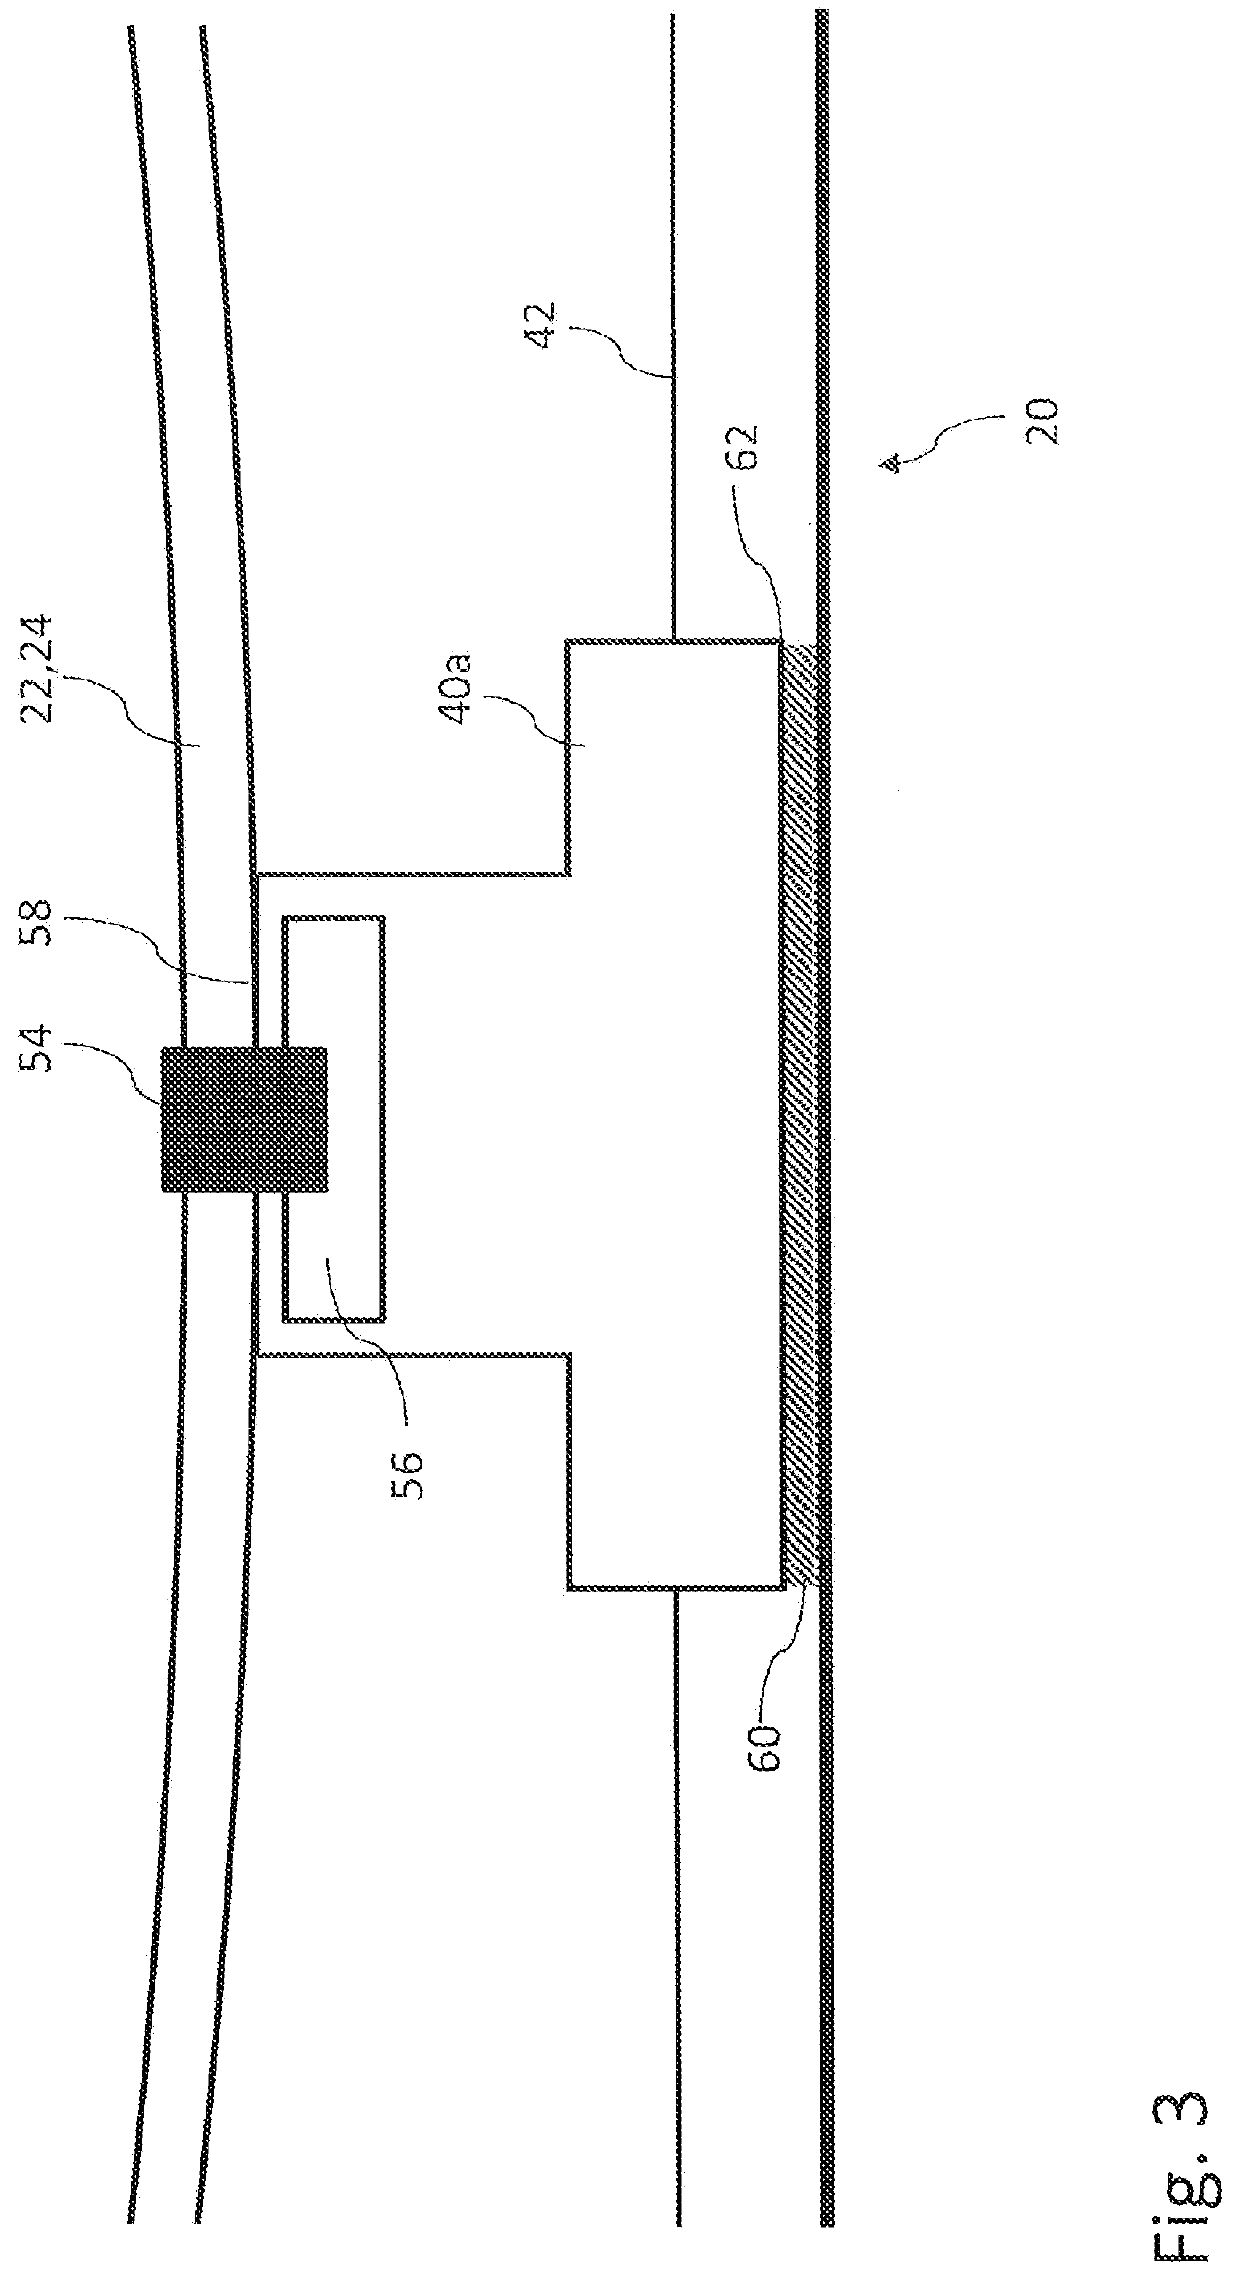 Method of securing cables to a wind turbine blade